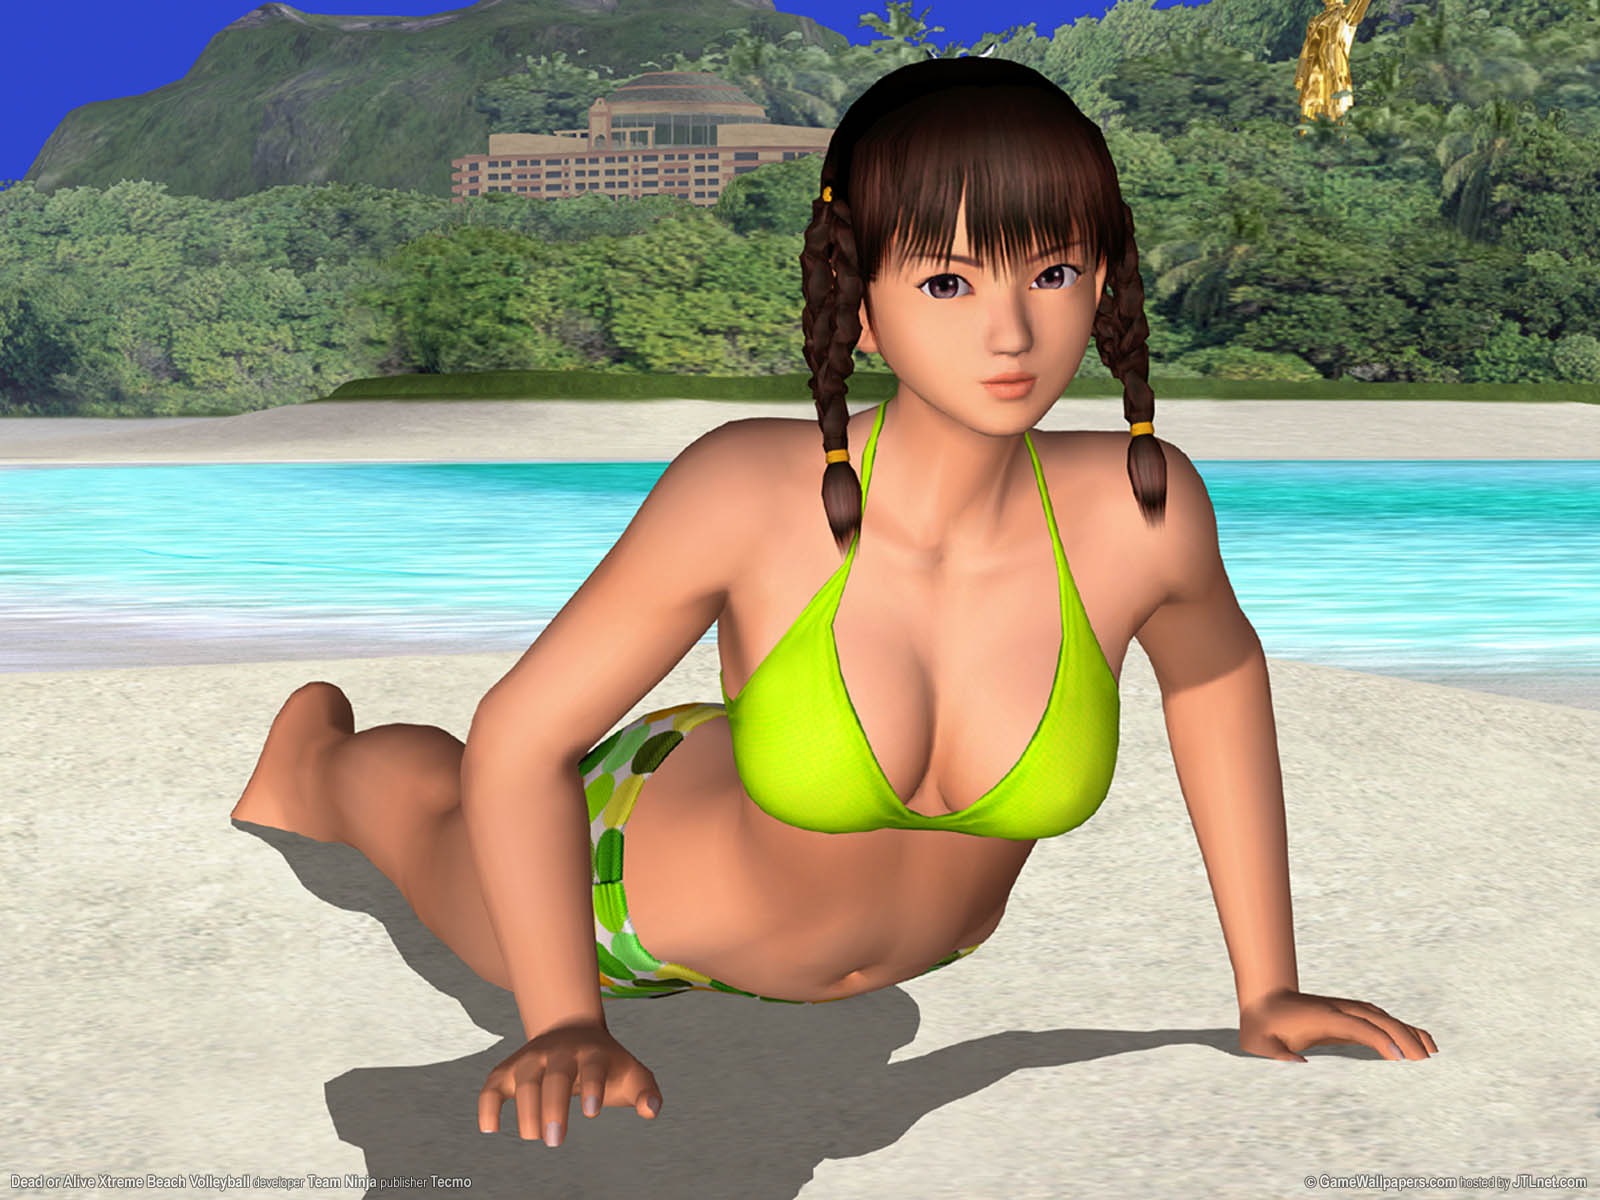 Dead or Alive Xtreme Beach Volleyball wallpaper 14 1600x1200